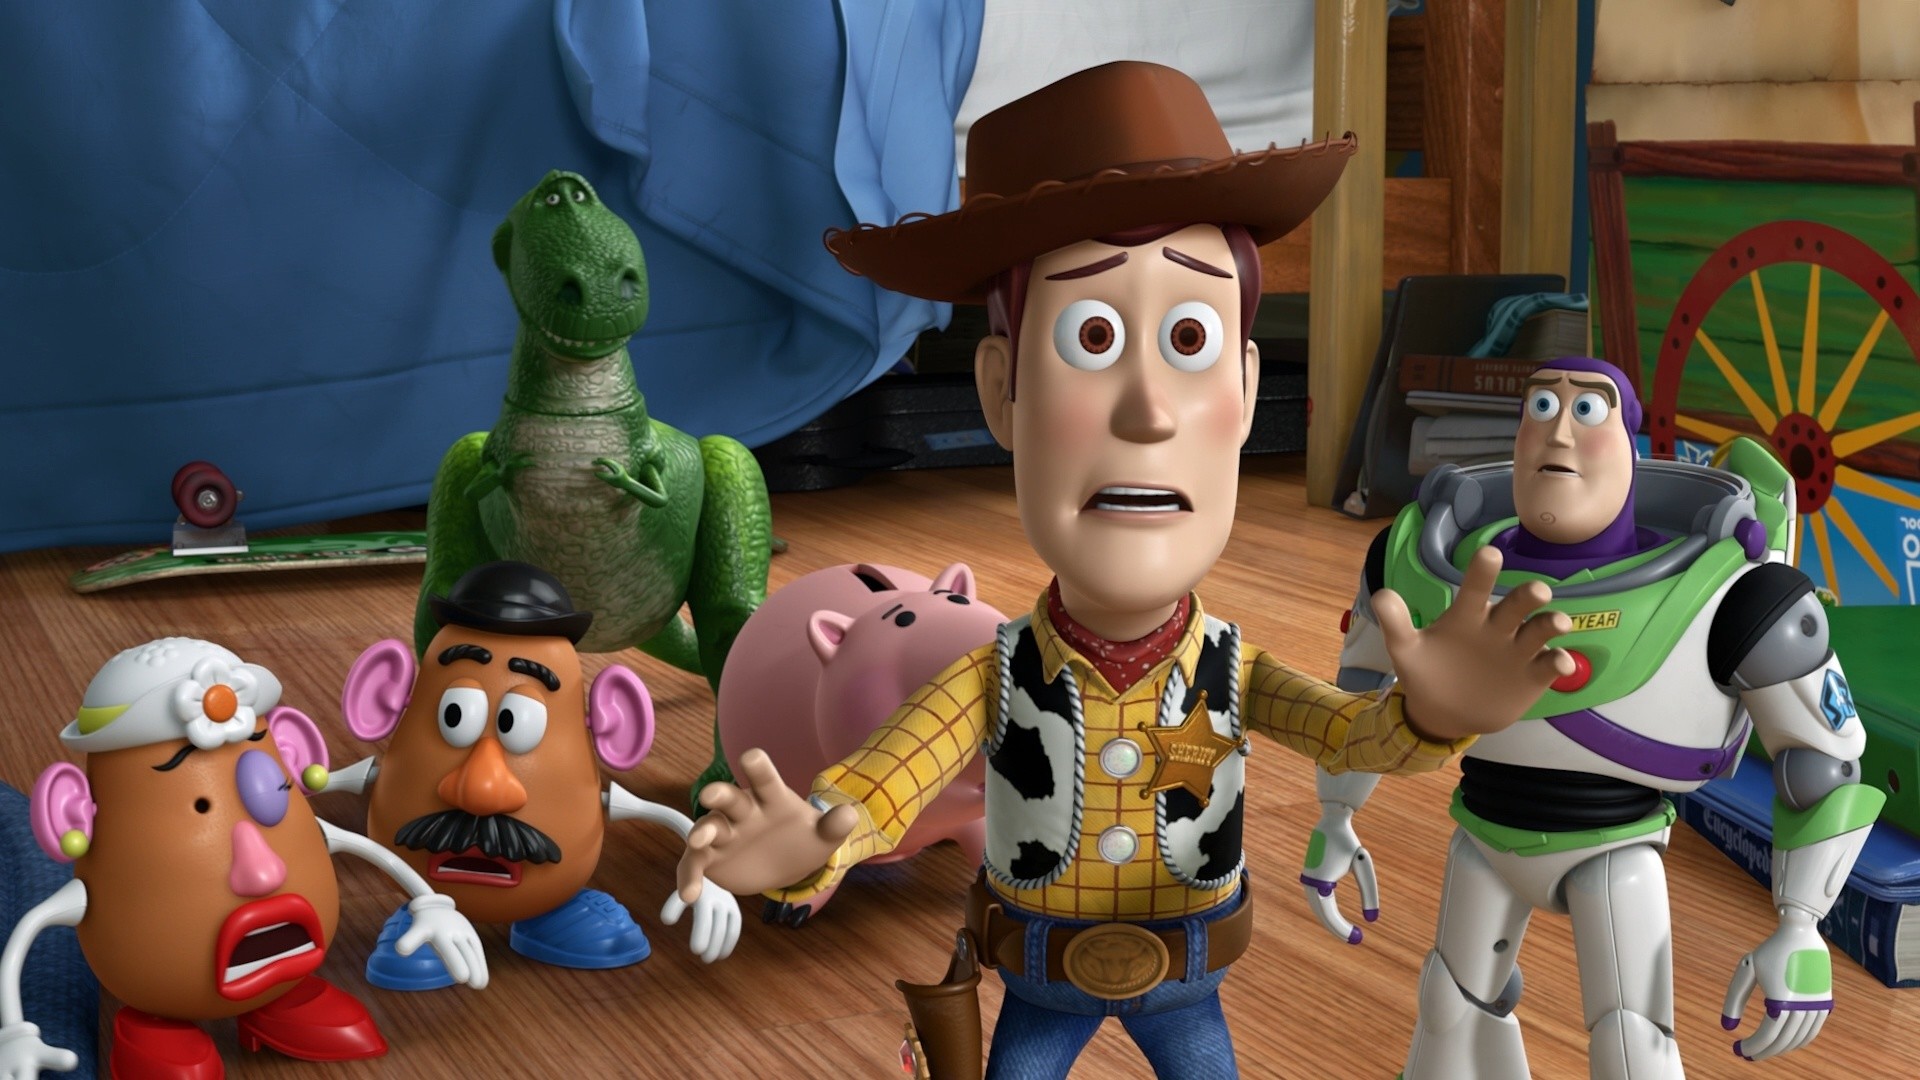 1920x1080 Toy Story Woody Wallpaper Toy Story 3 in Woody